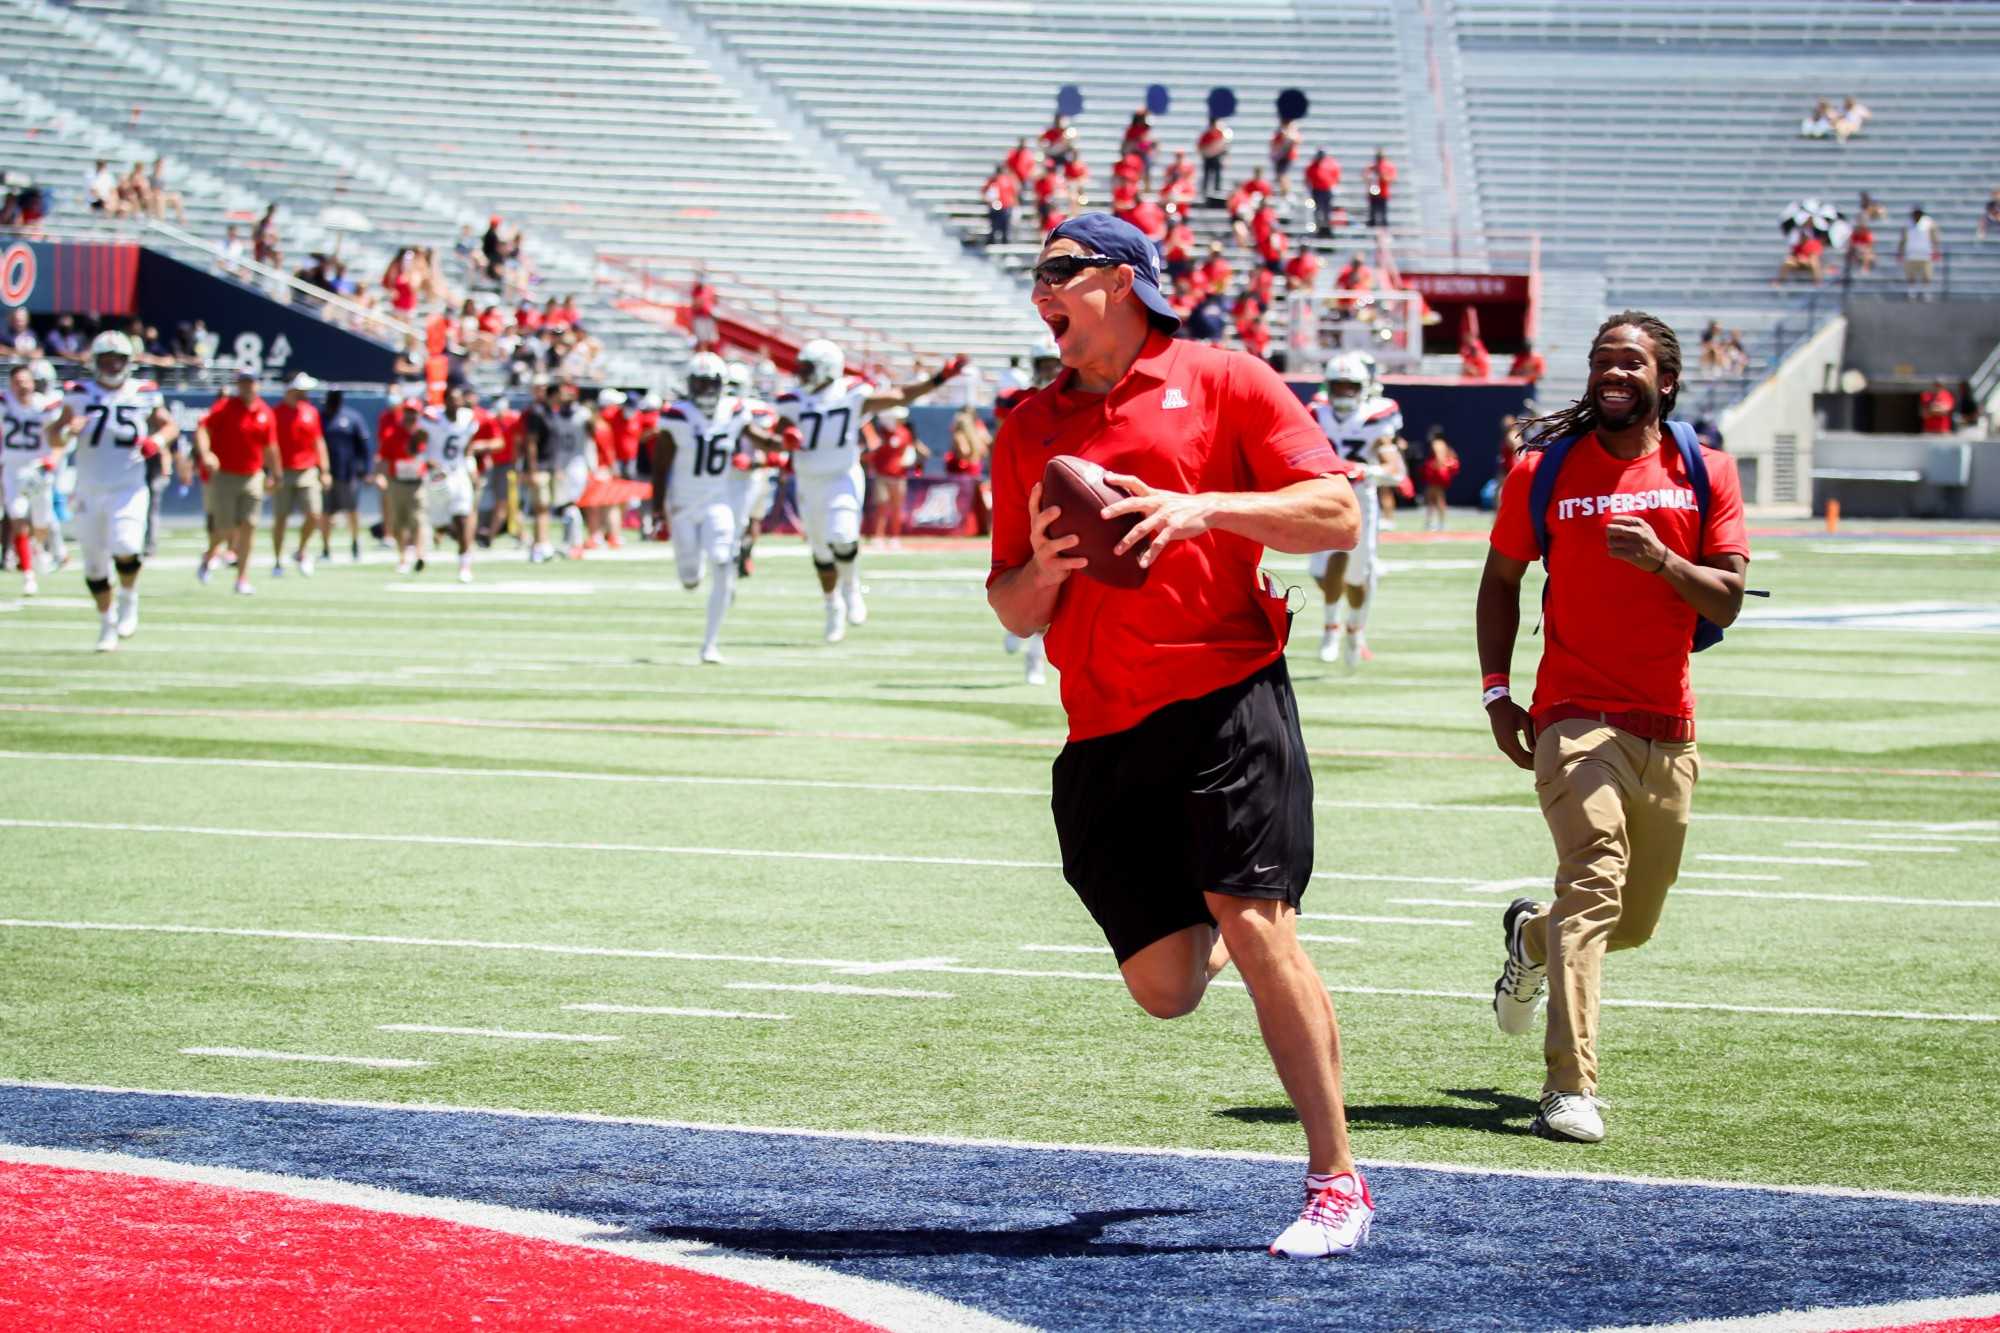 Gronkowski scores a touchdown after the Spring Game on Saturday, April 24 in Tucson, Ariz. Gronkowski’s team defeated Bruschi’s team 17-13.